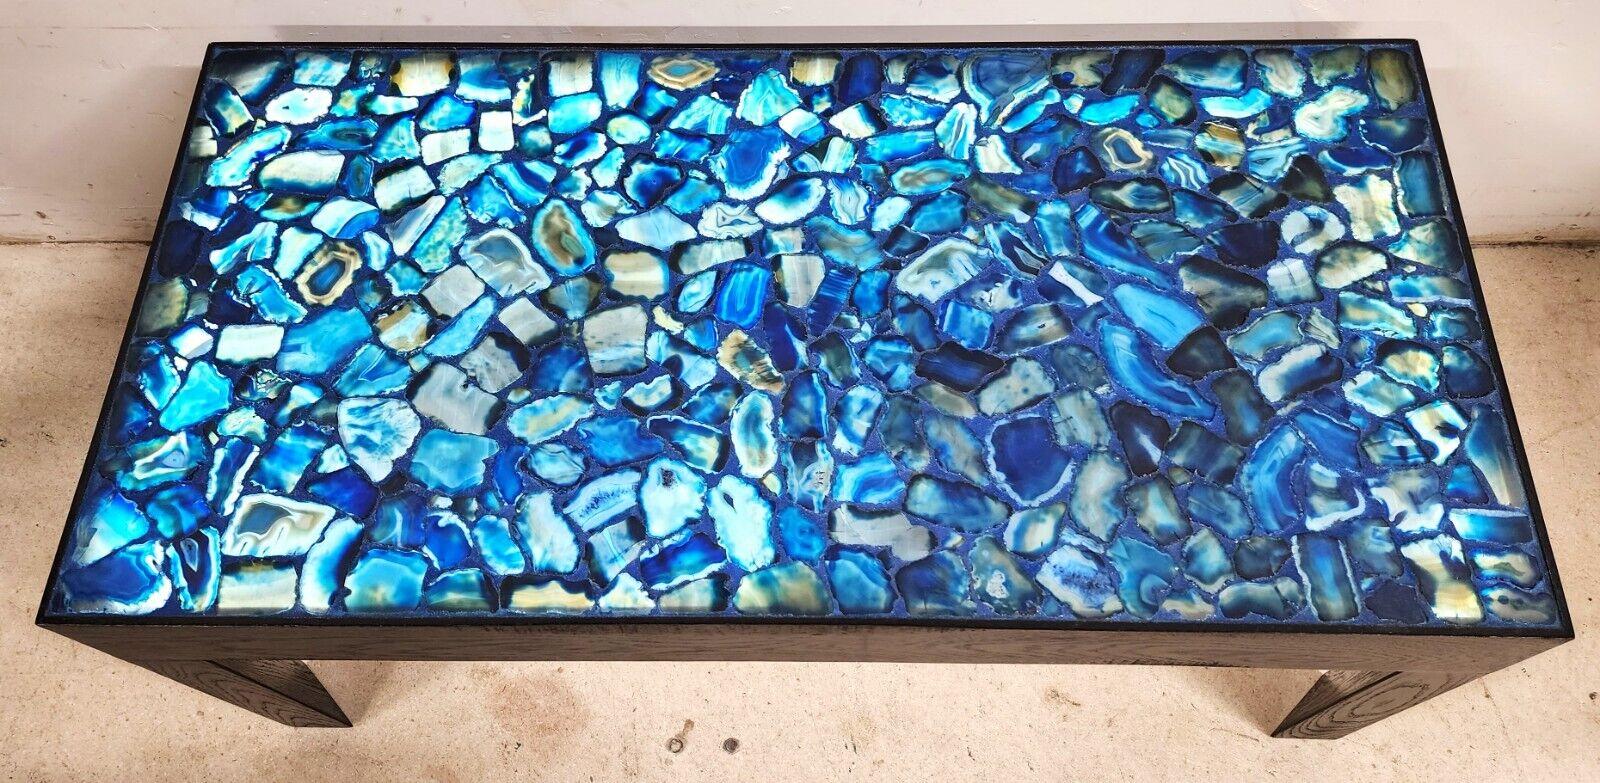 For FULL item description click on CONTINUE READING at the bottom of this page.

Offering One Of Our Recent Palm Beach Estate Fine Furniture Acquisitions Of A
Custom-Made Backlit Blue Agate Coffee Table 
It is lit from underneath with low wattage